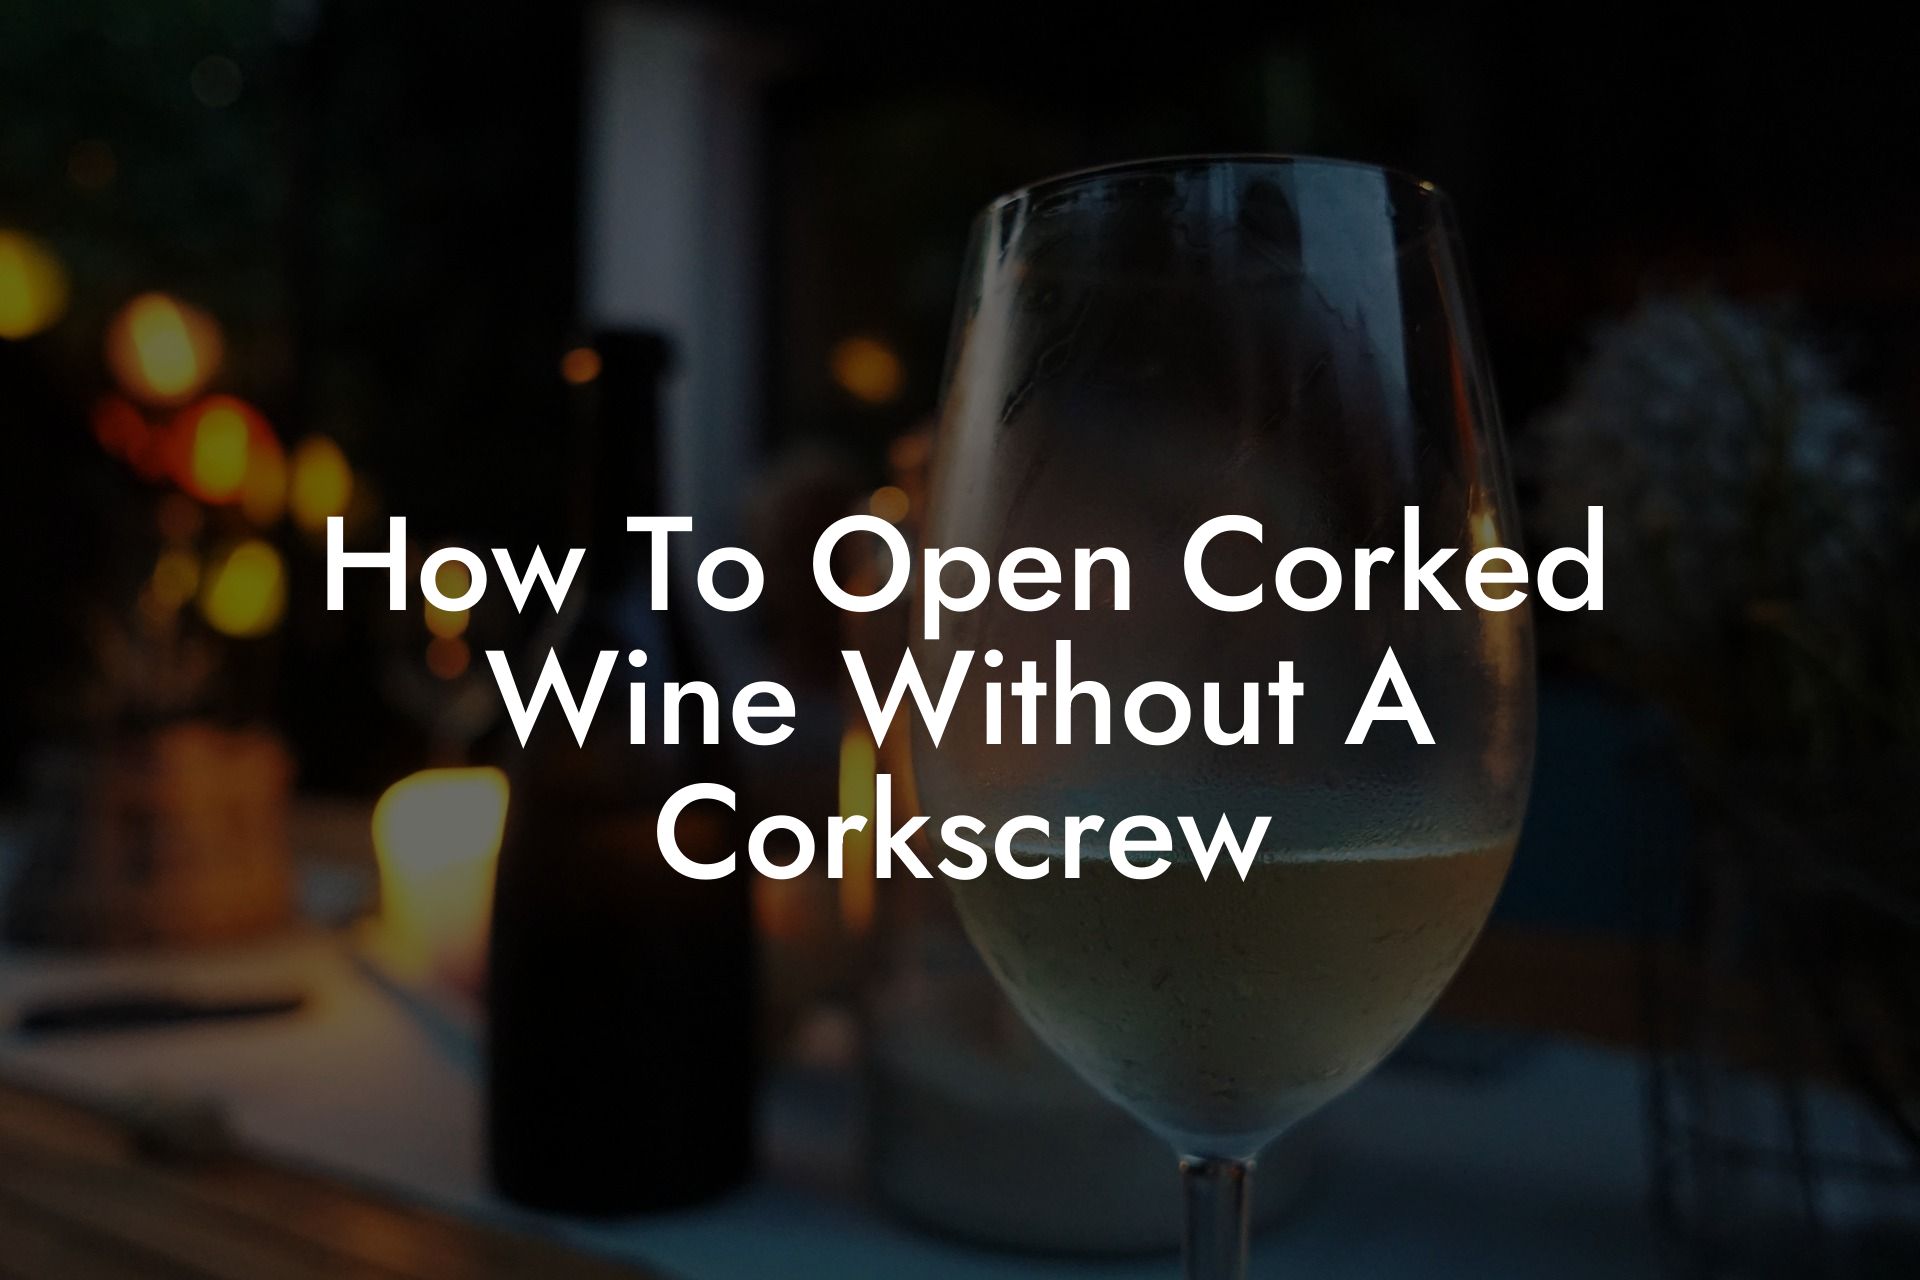 How To Open Corked Wine Without A Corkscrew